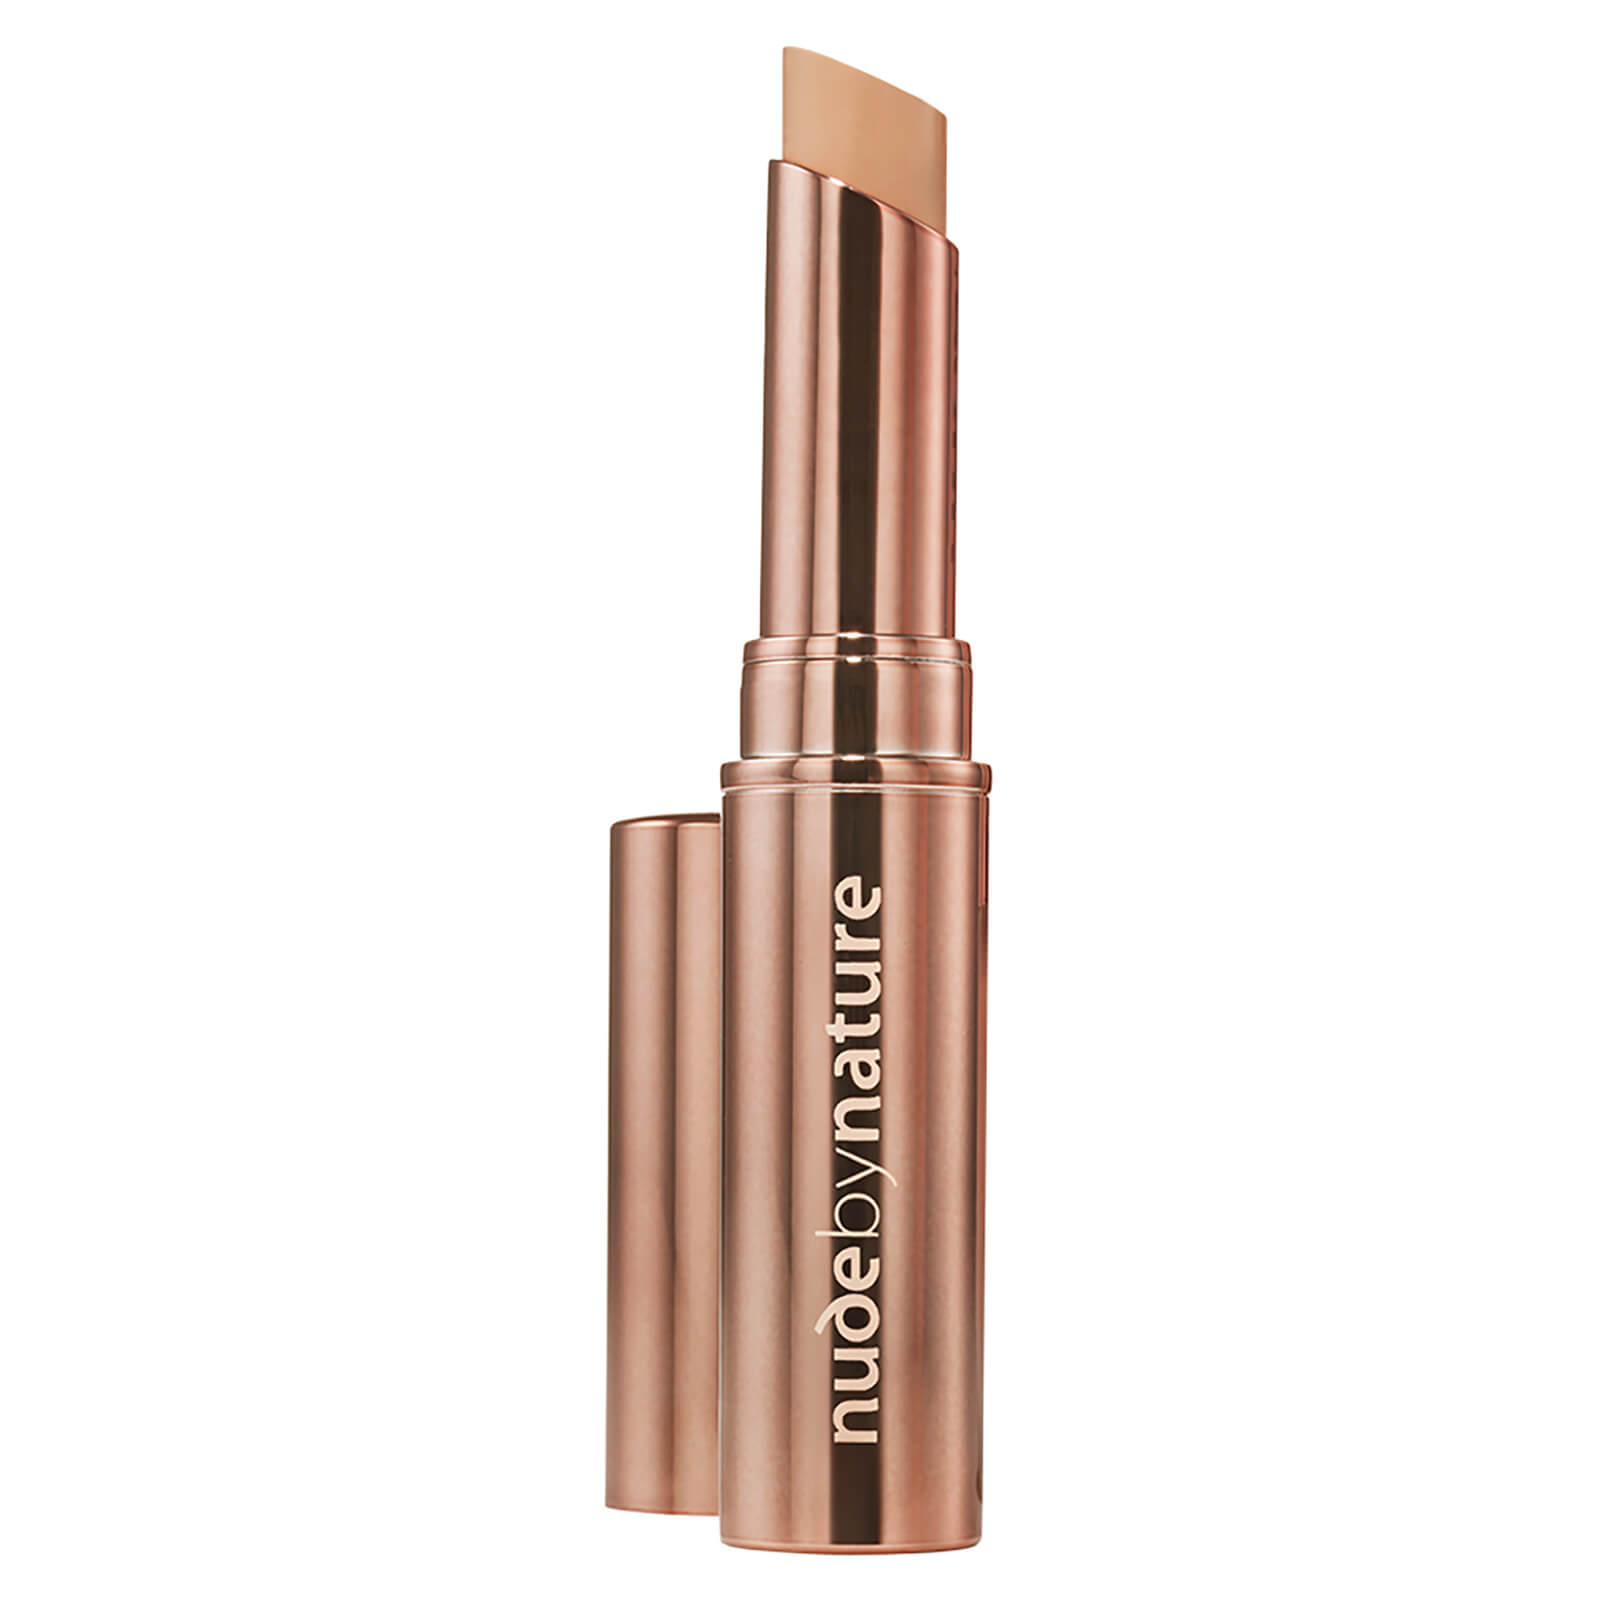 nude by nature Flawless Concealer 2.5g (Various Shades) - 05 Sand